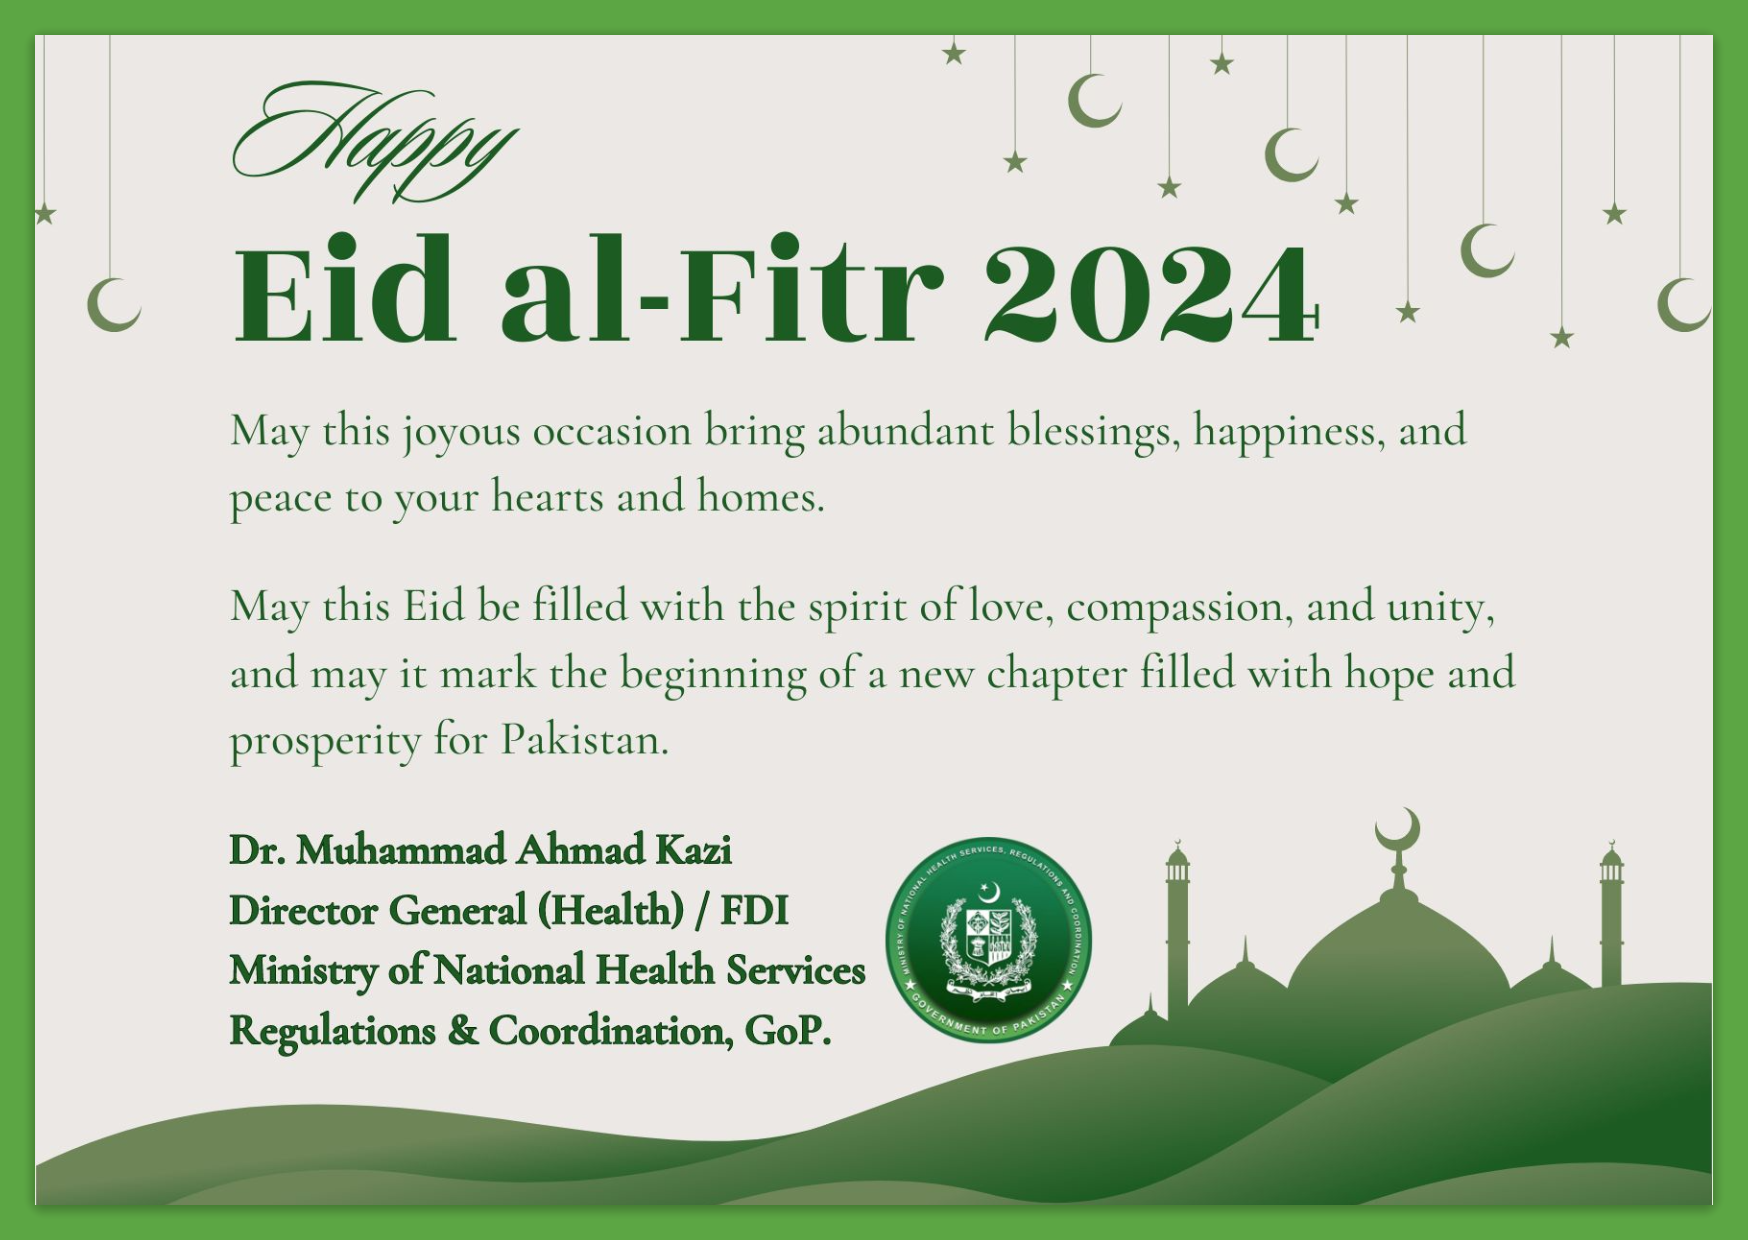 Federal Directorate of Immunization wishes you a blessed Eid al-Fitr 2024